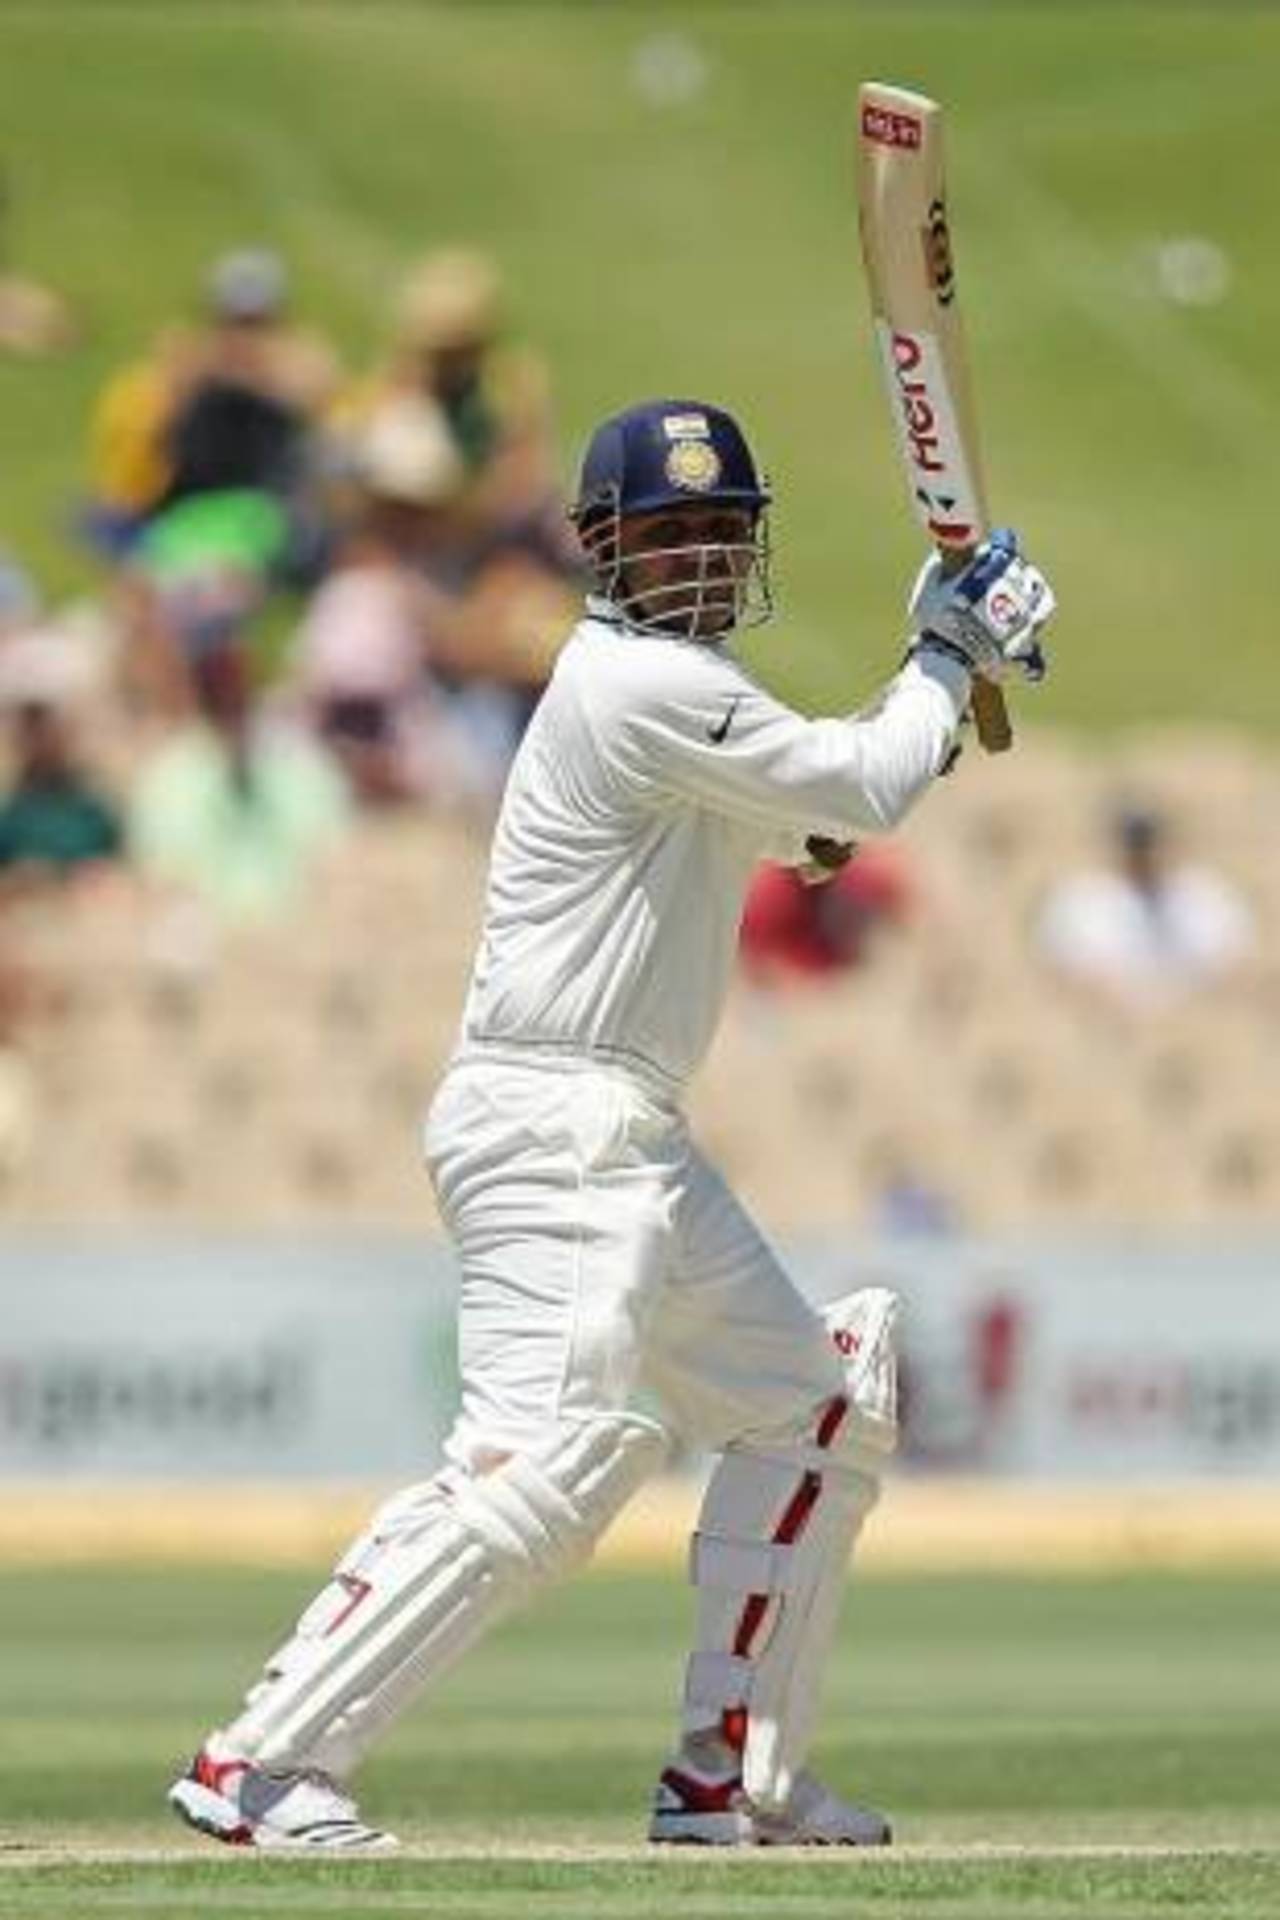 Virender Sehwag made a quick half-century, Australia v India, 4th Test, Adelaide, 4th day, January 27, 2012